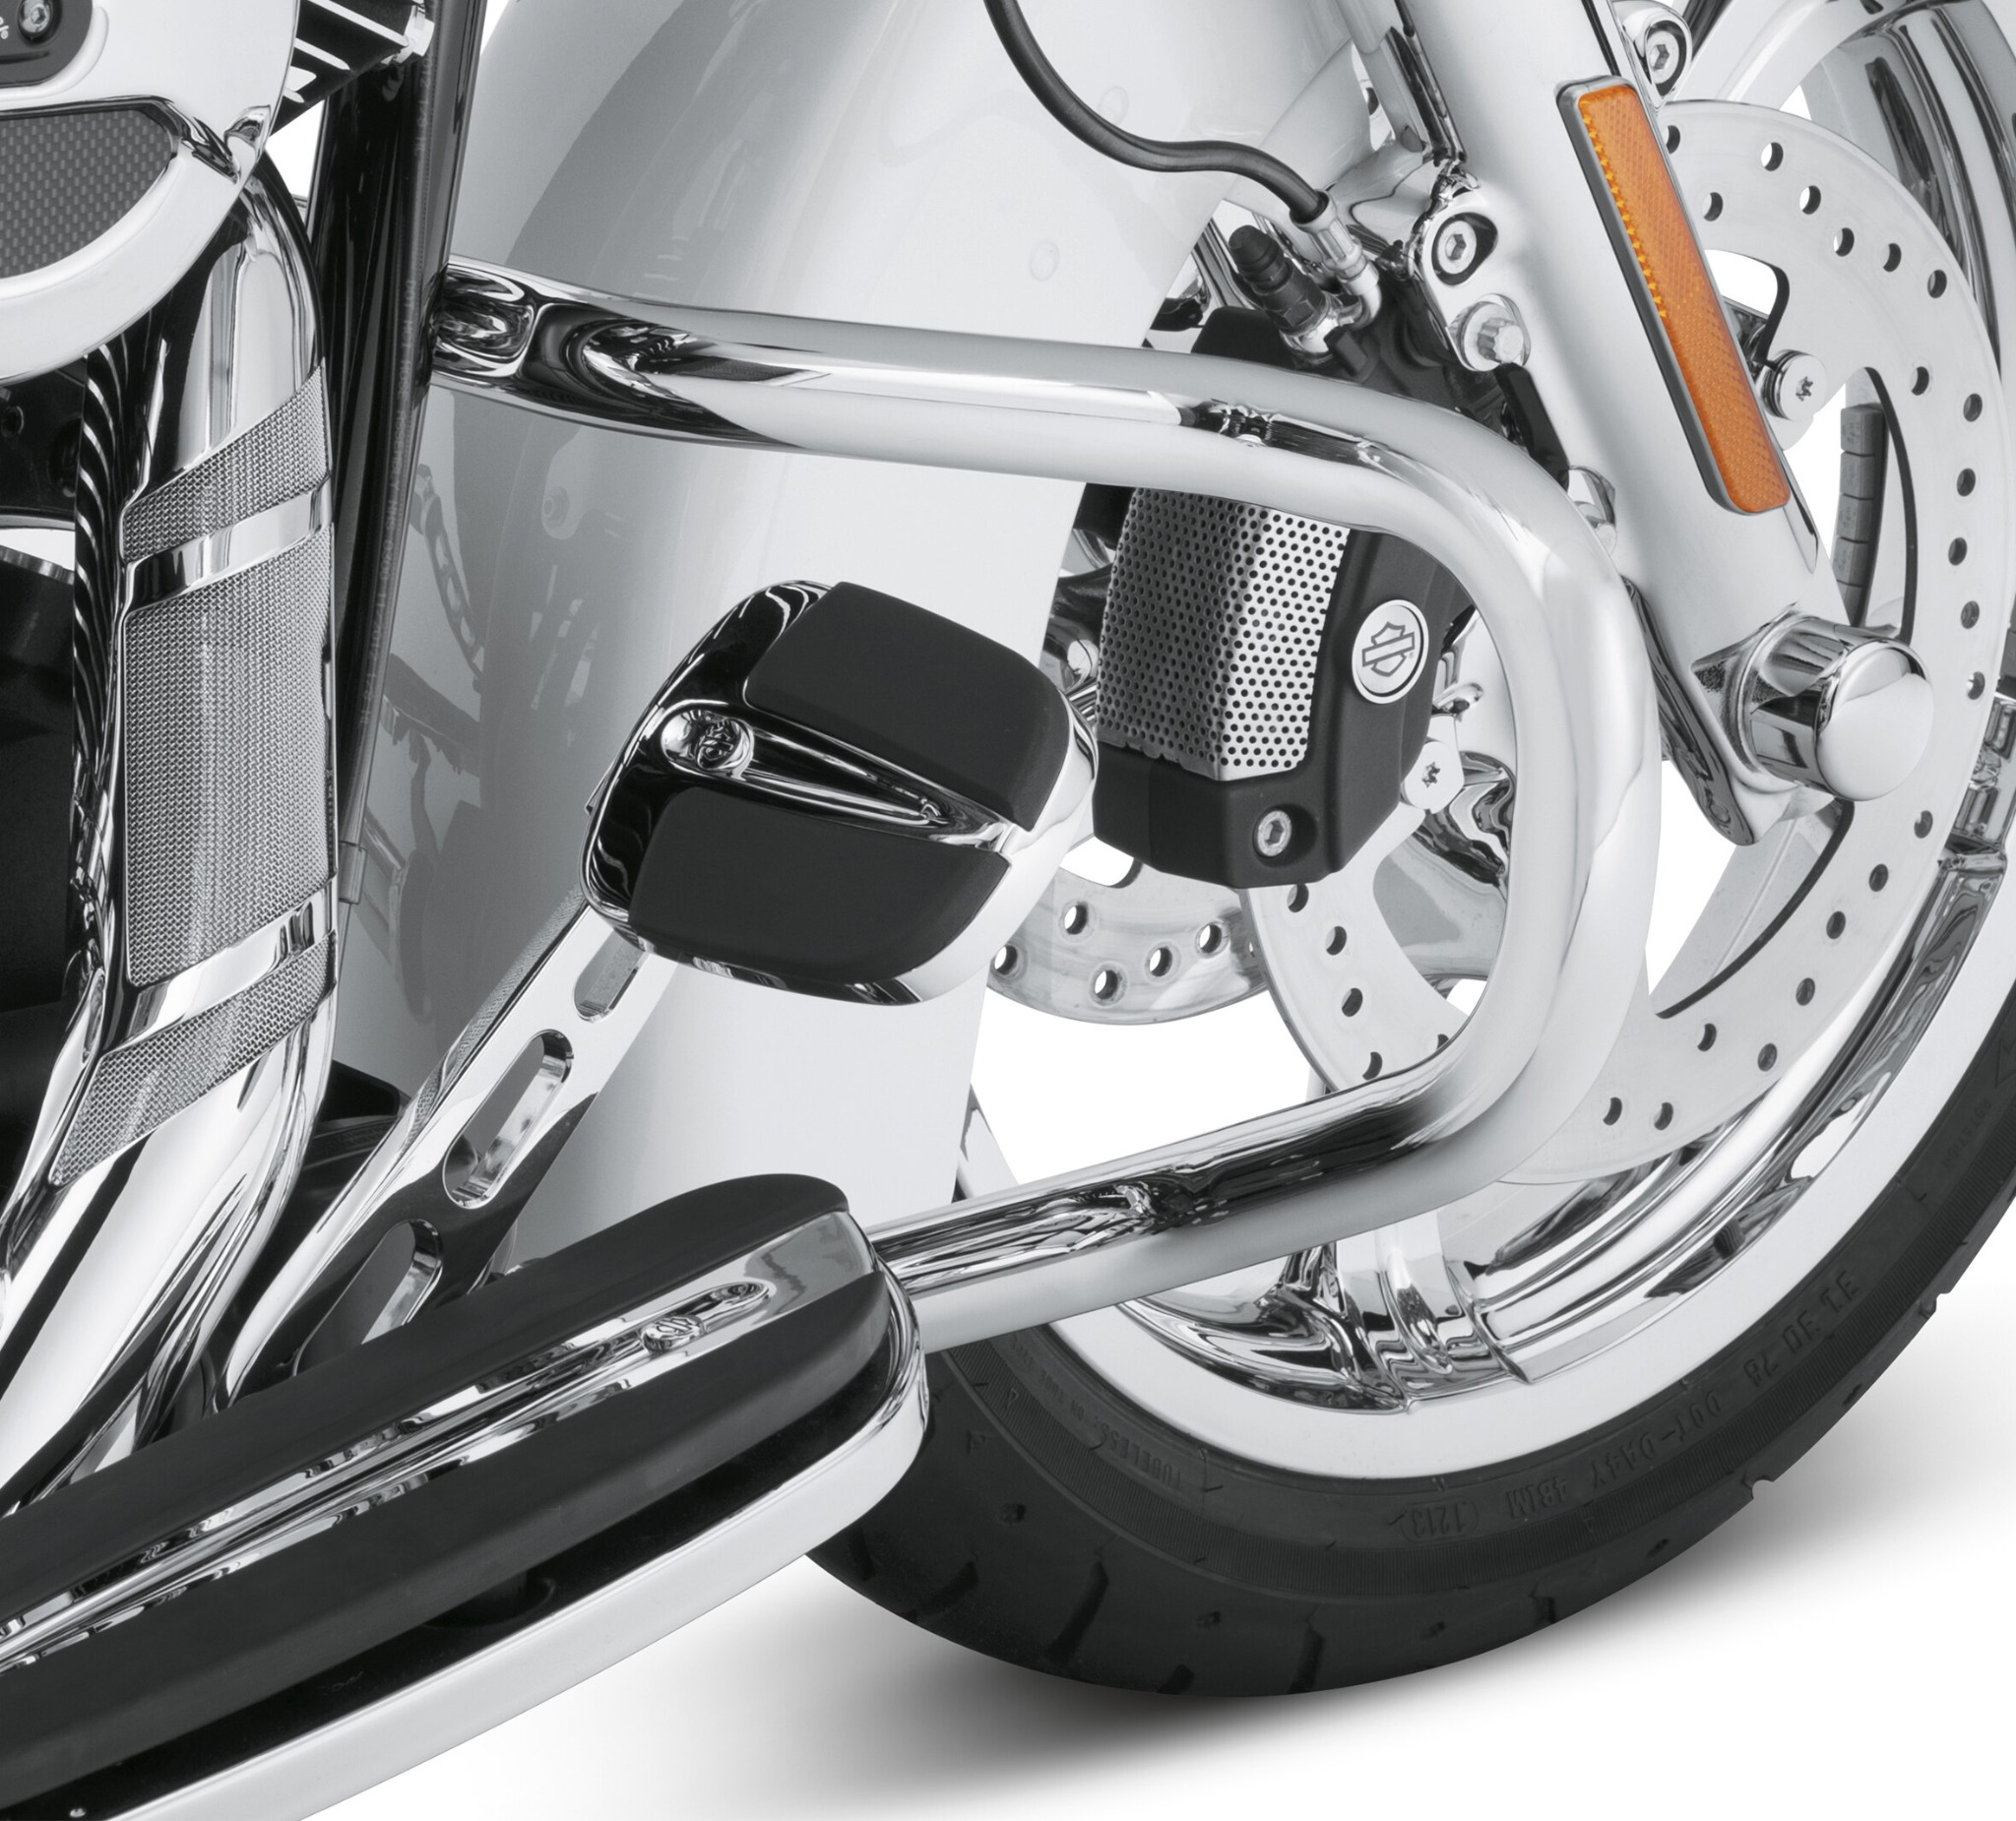 Engine Highway Guard Bar Fit For Harley Touring Electra Glide Ultra Classic 